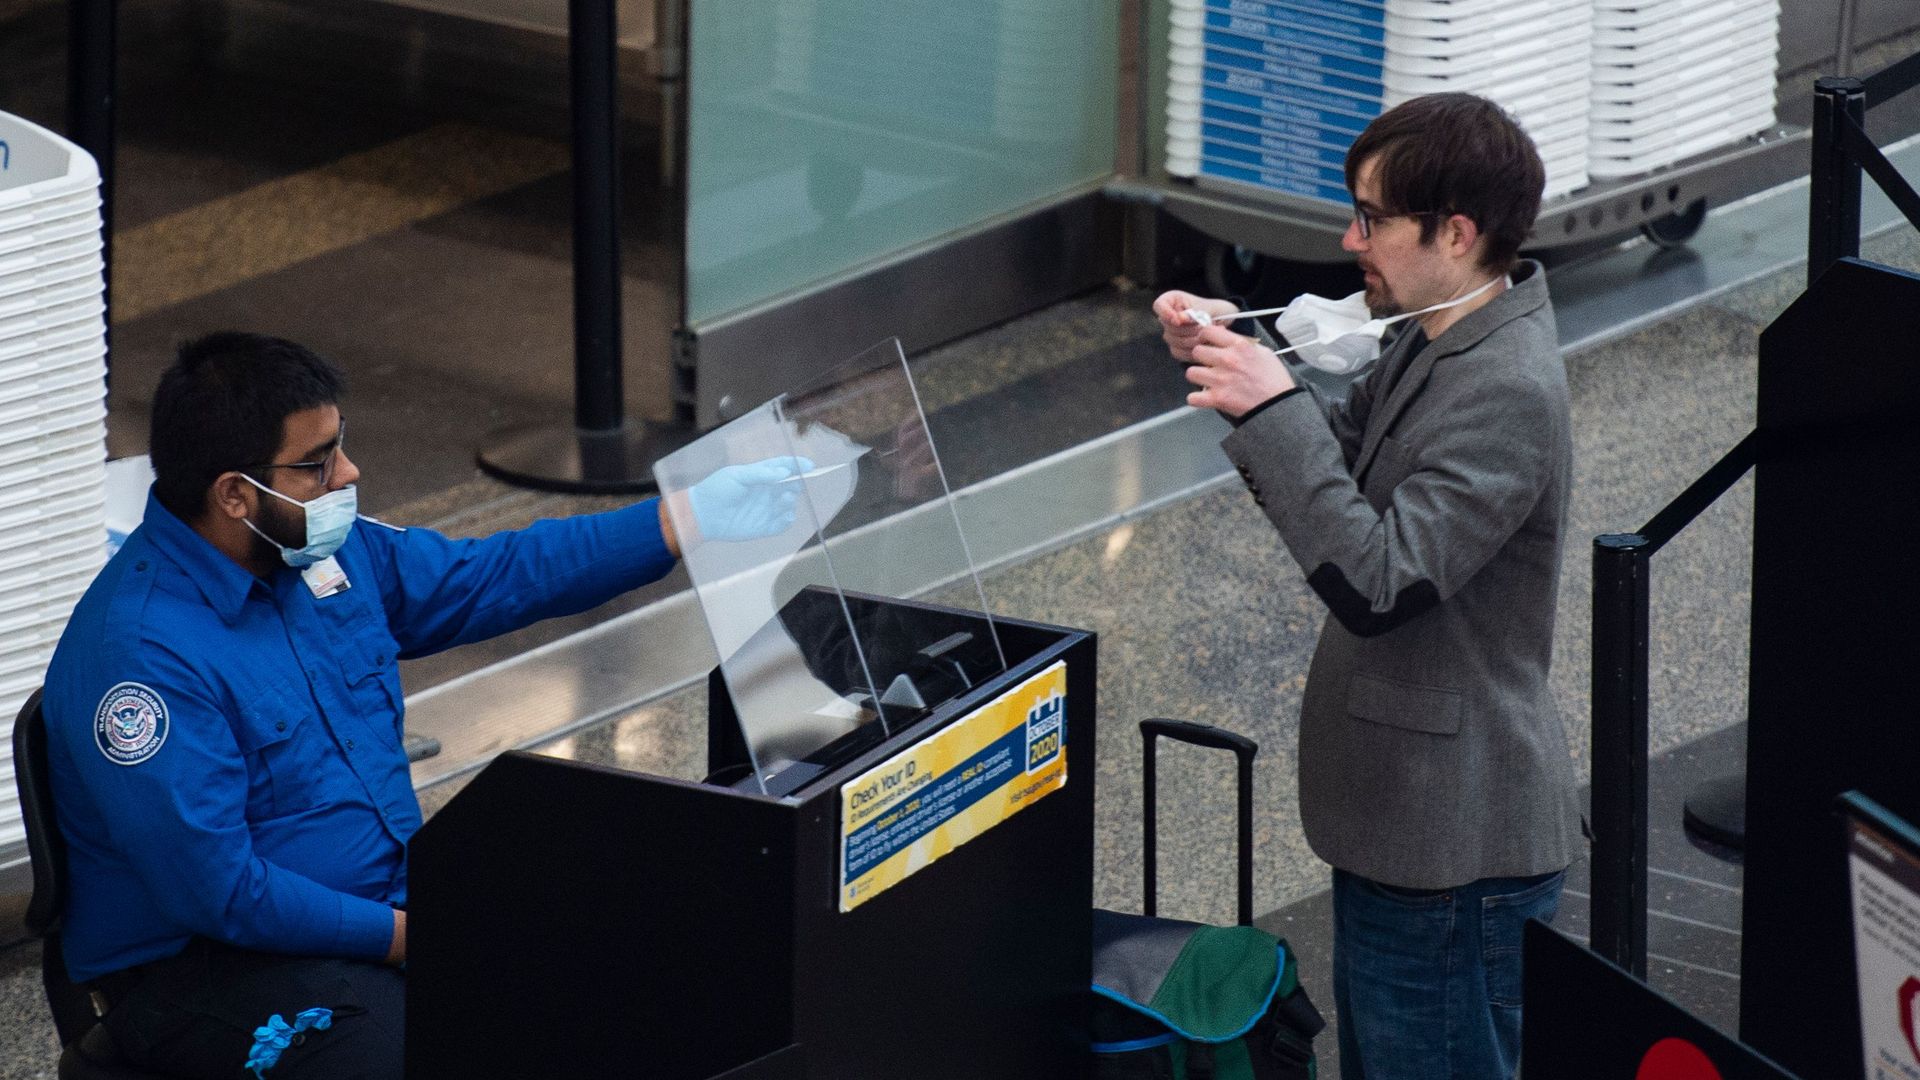 A passenger removes a mask to be checked by a TSA officer.